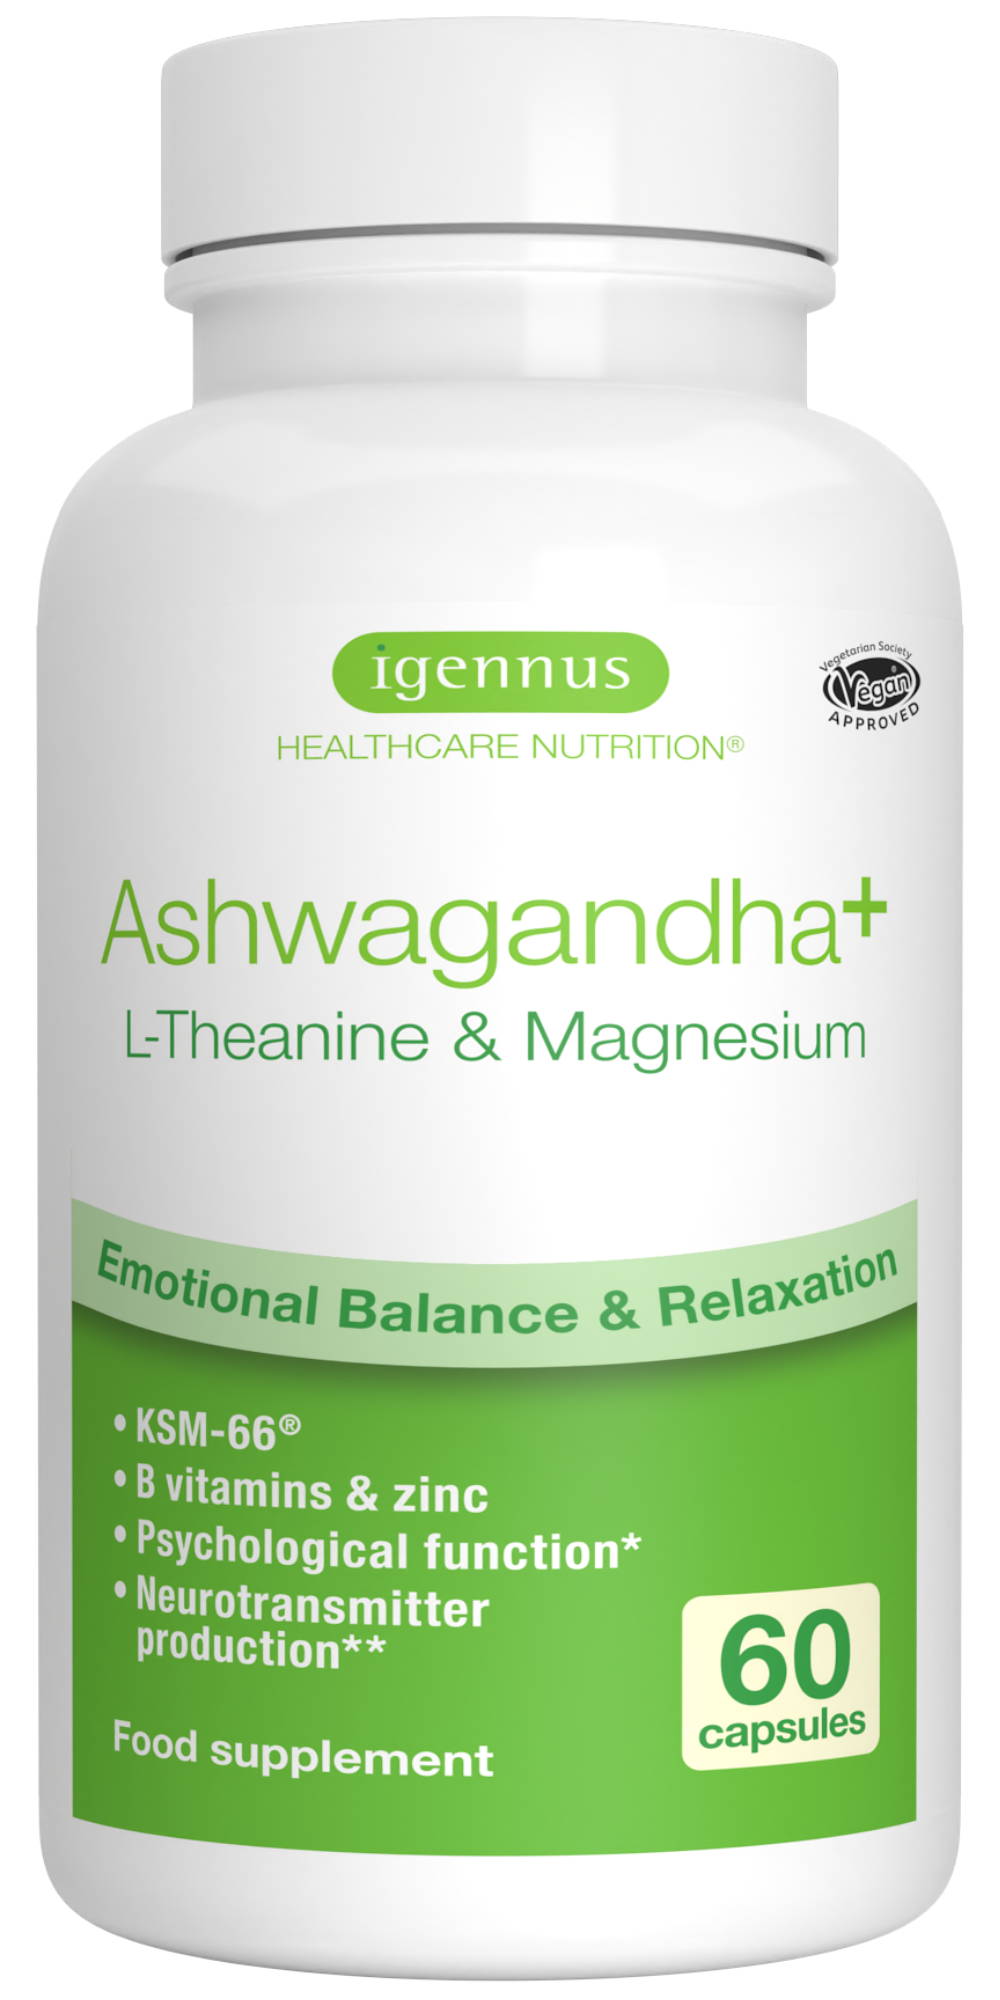 Using the most researched KSM-66 ashwagandha root-only extract in these advanced ashwagandha capsules